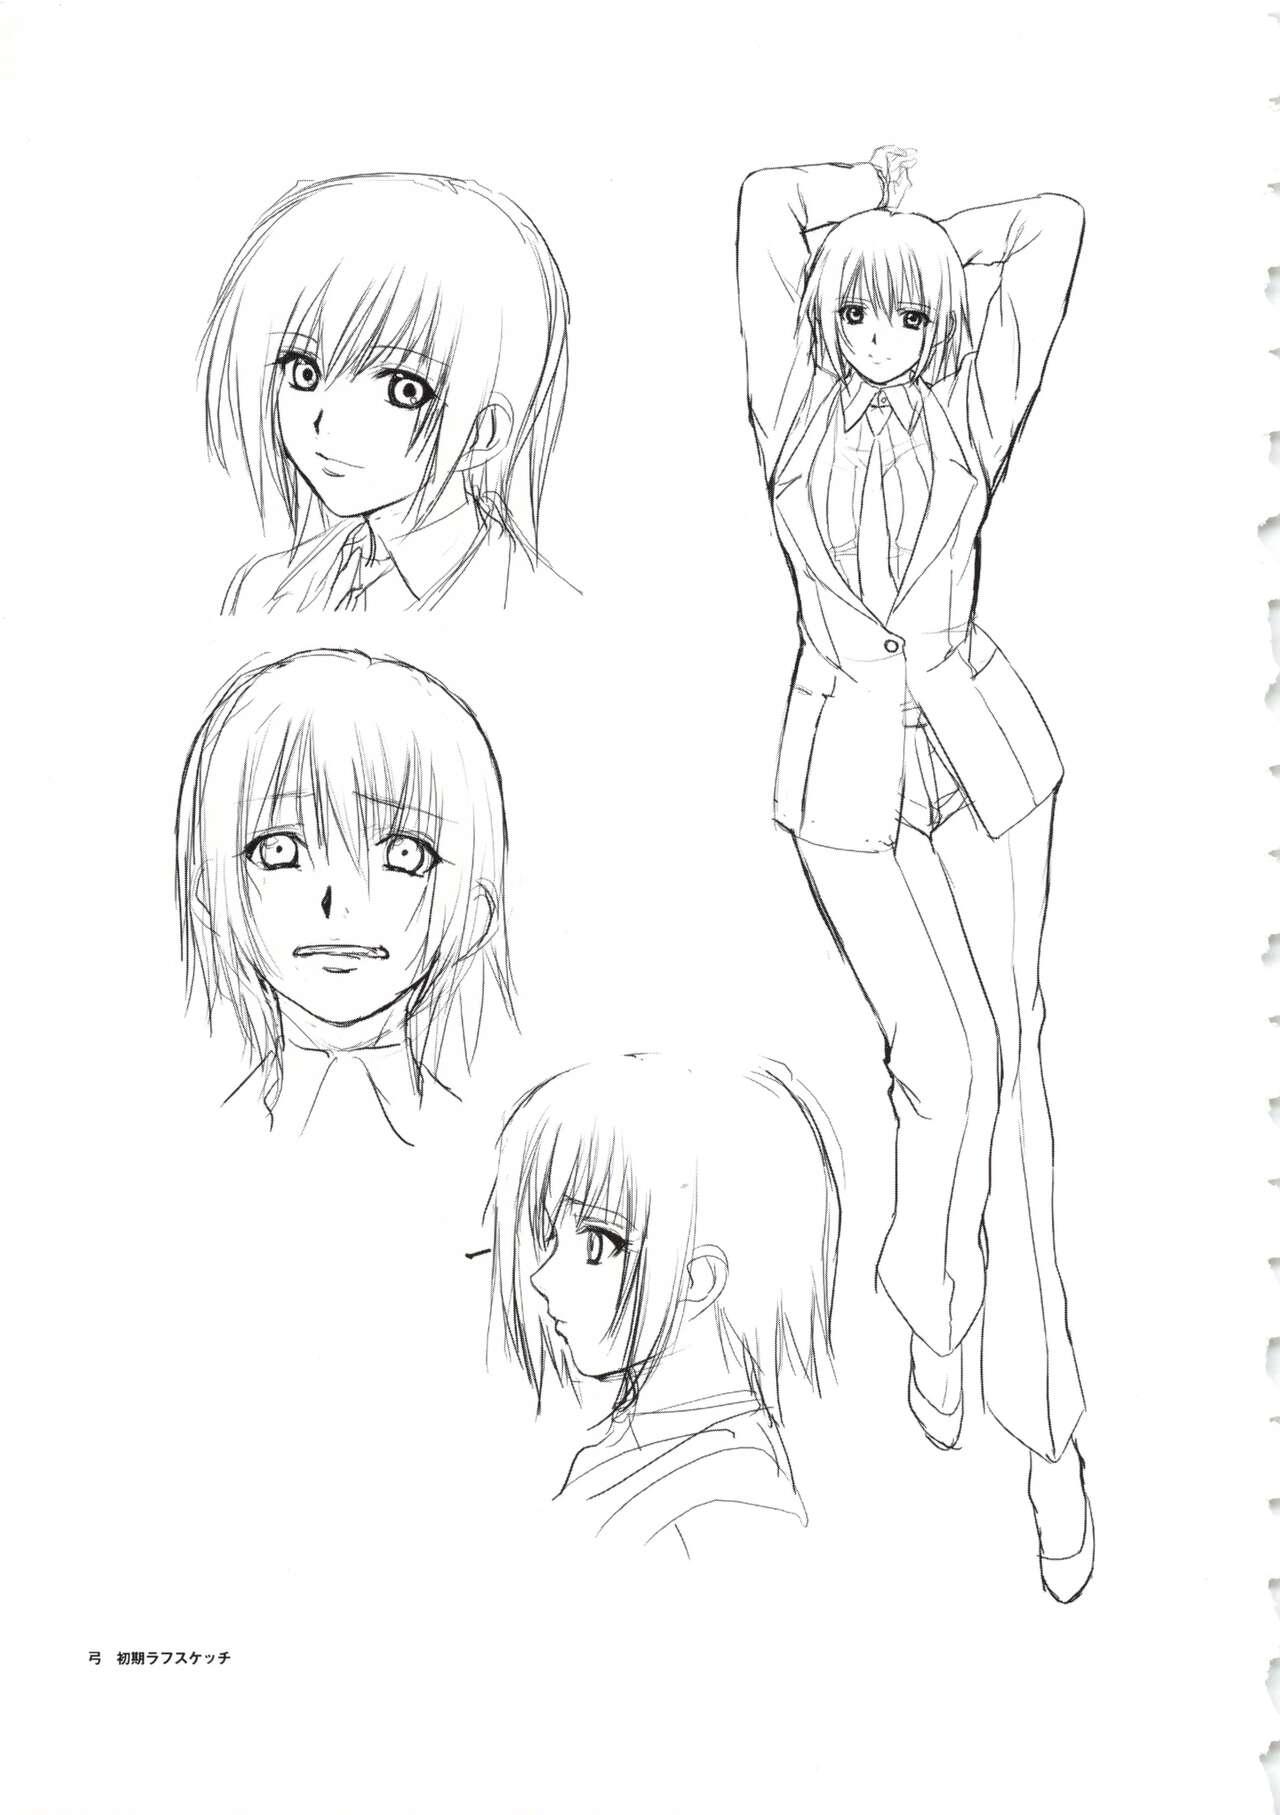 Letsdoeit Hanachirasu - Initial Sketches and Unprocessed Illustrations - Selection She - Page 11